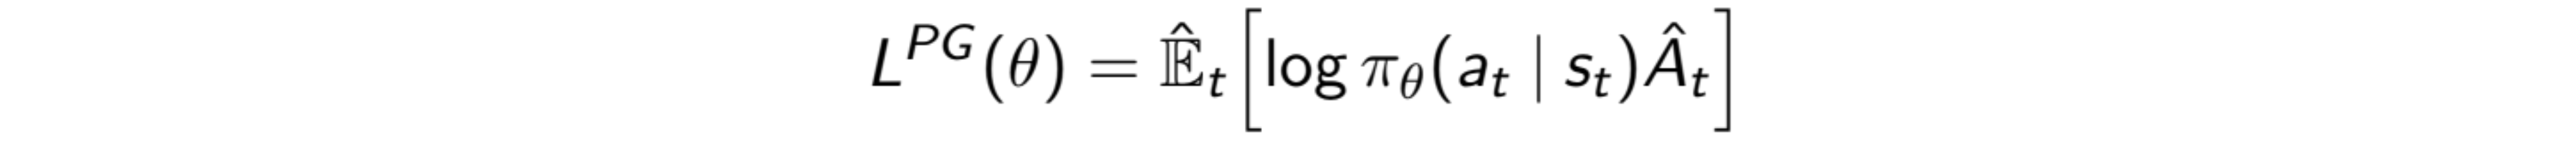 Surrogate advantage in terms of log